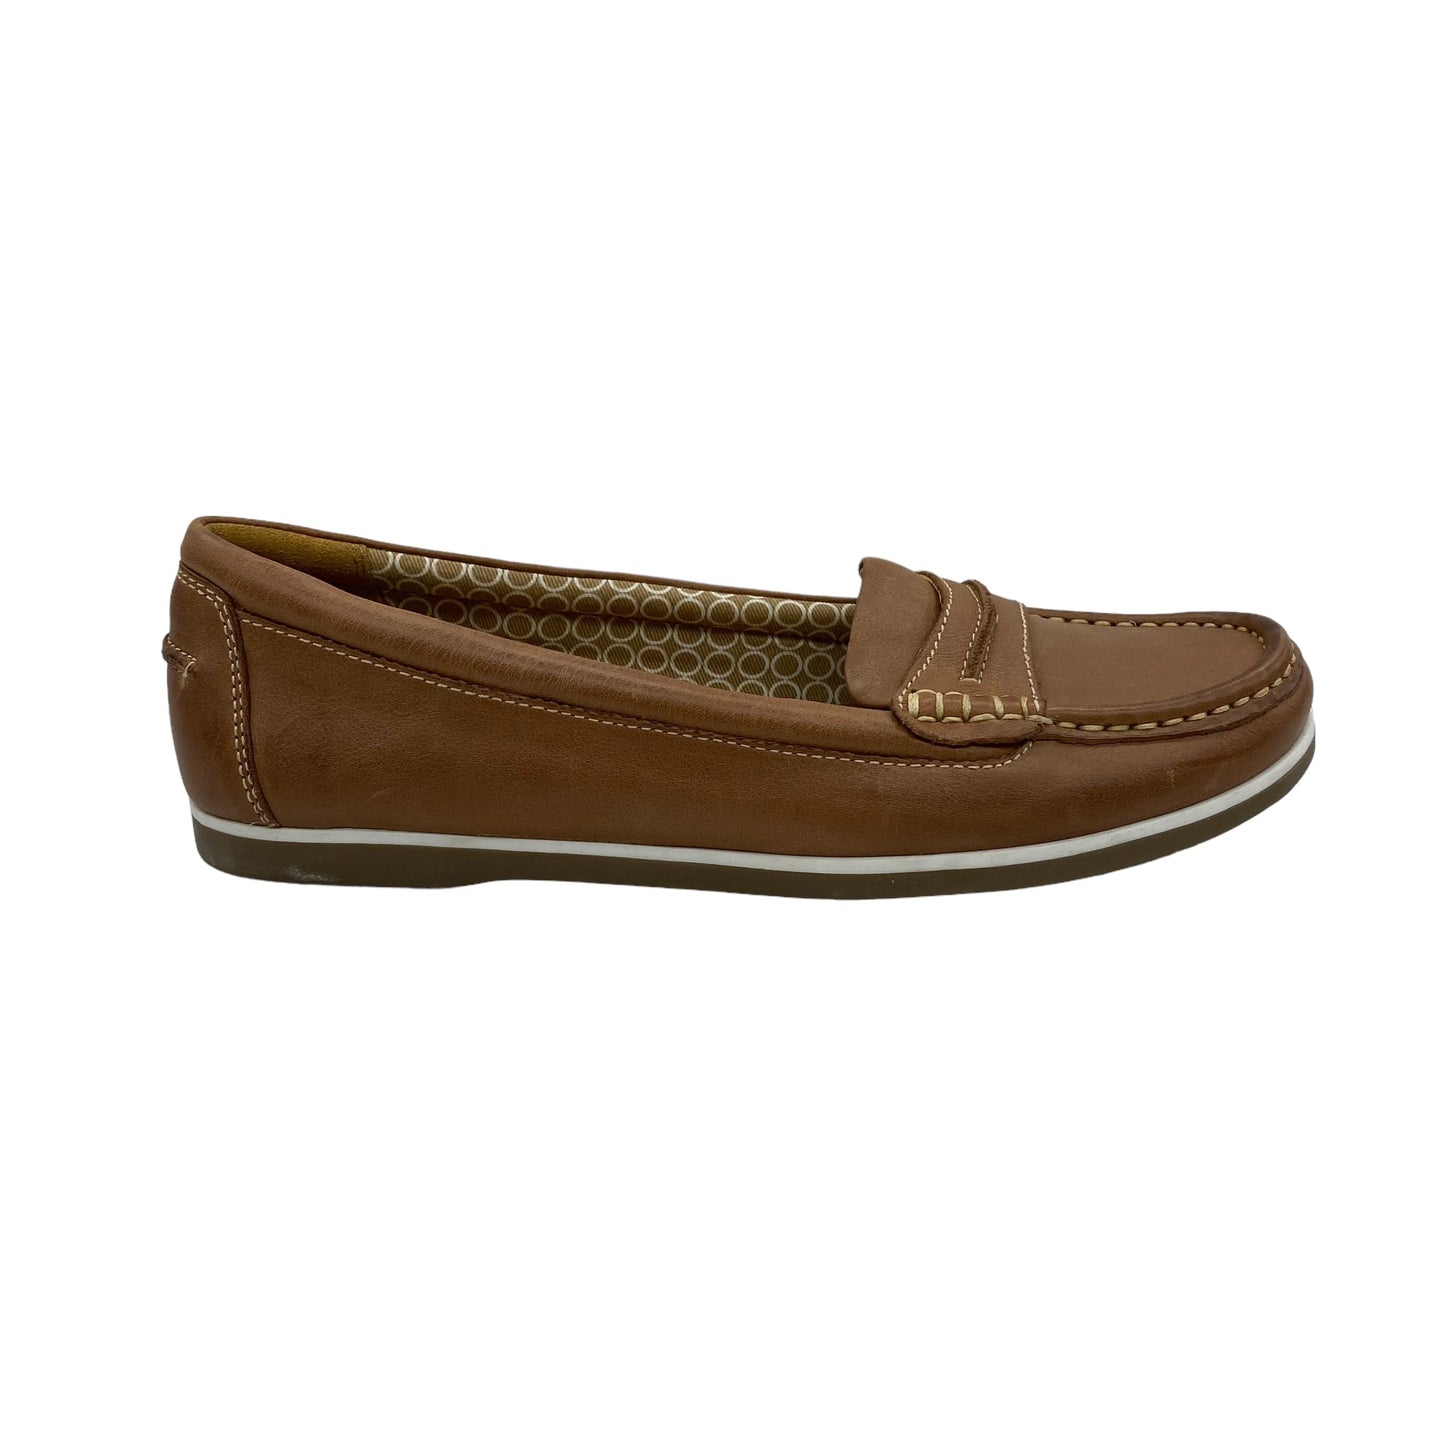 BROWN SHOES FLATS by NATURALIZER Size:8